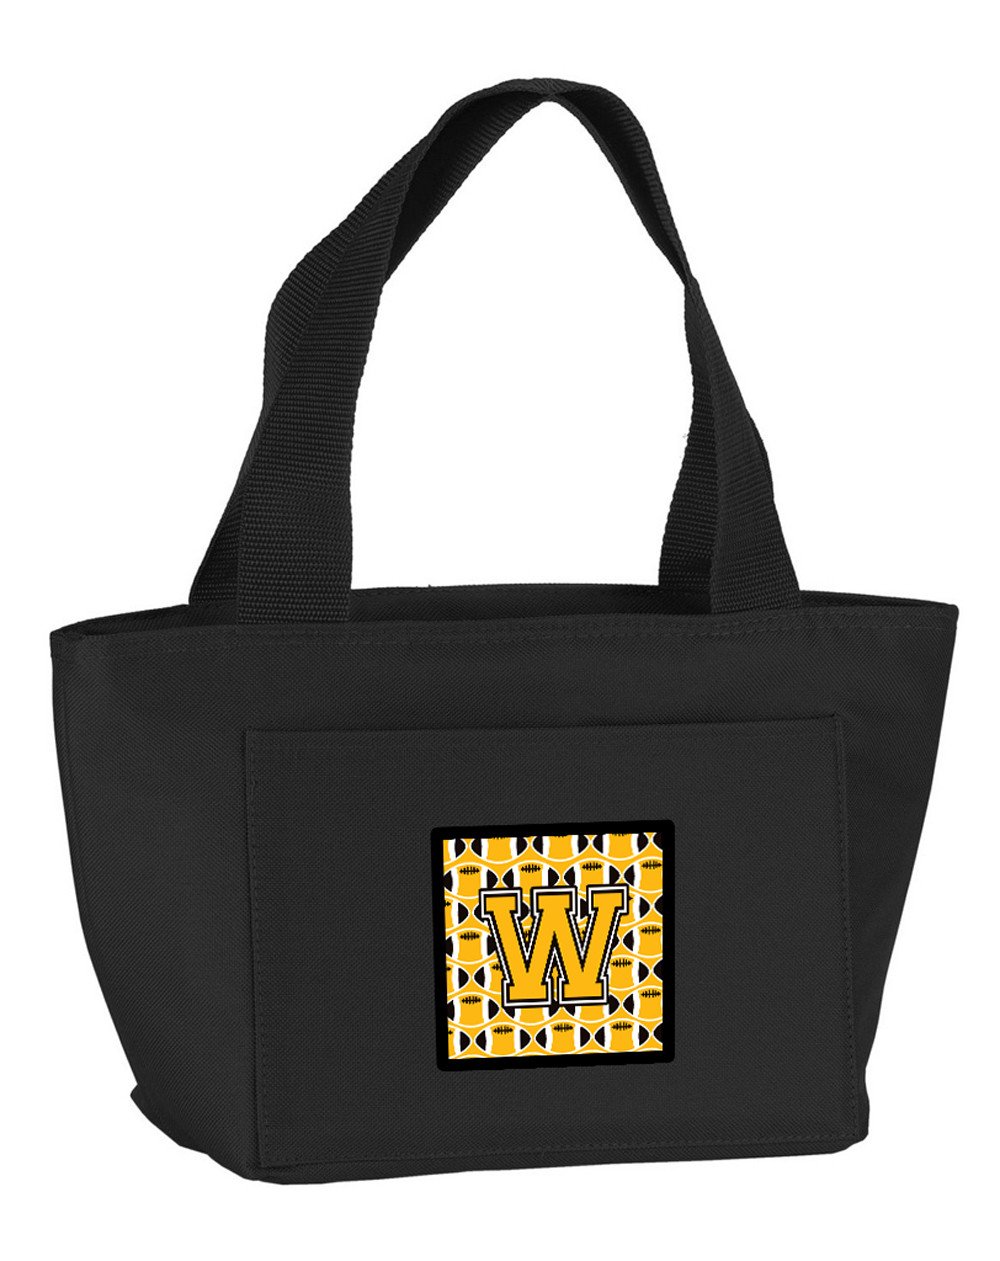 Letter W Football Black, Old Gold and White Lunch Bag CJ1080-WBK-8808 by Caroline's Treasures